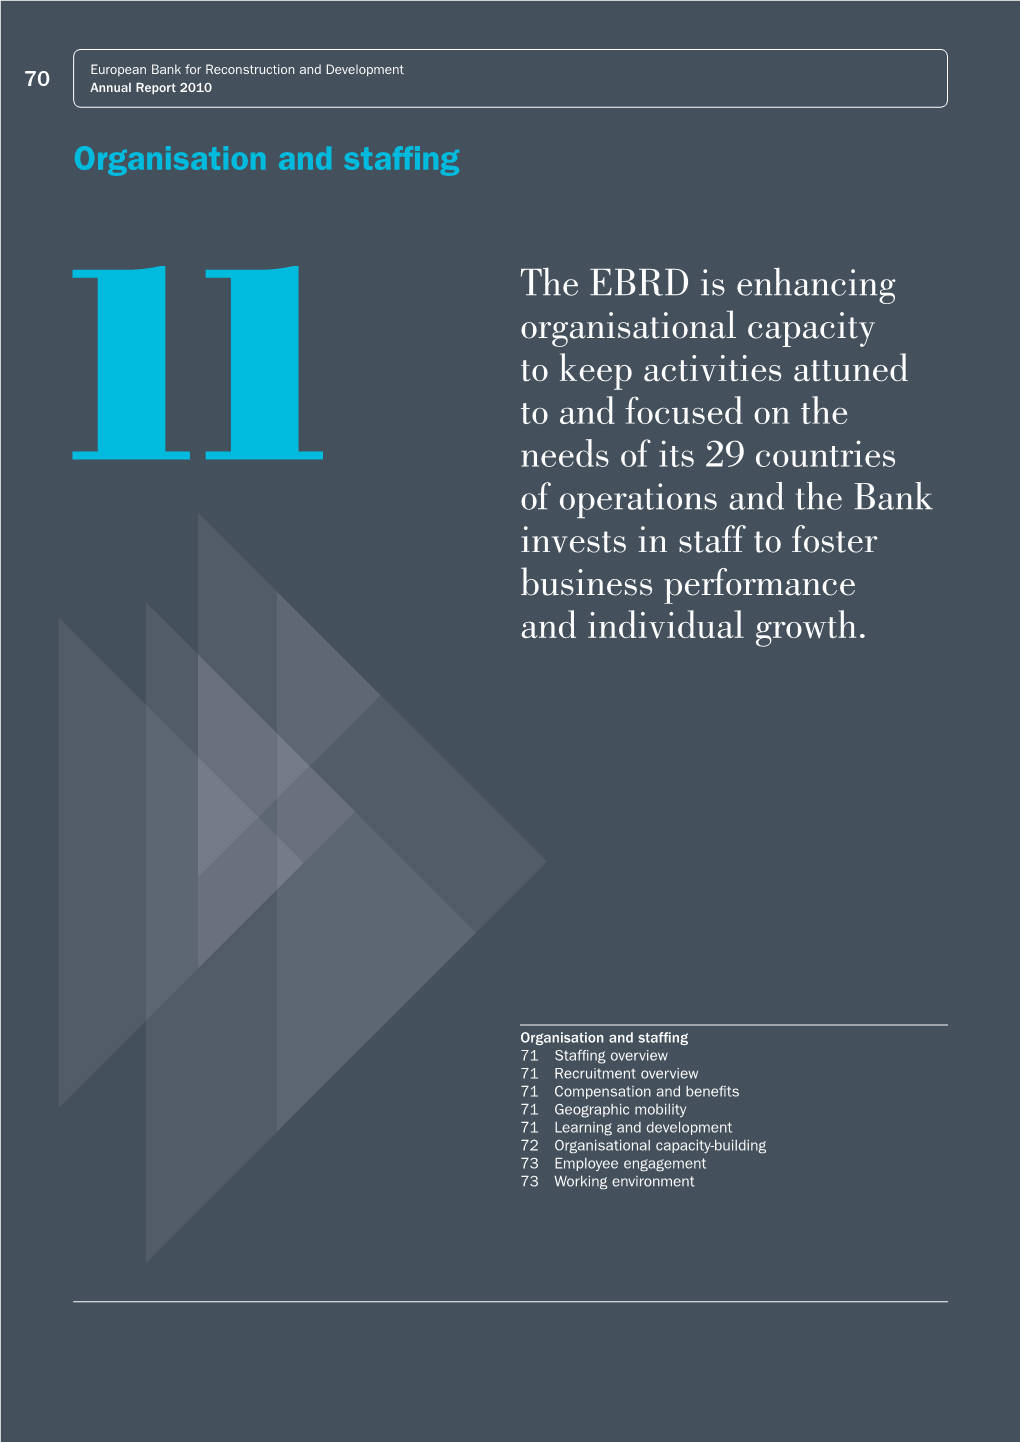 11 the EBRD Is Enhancing Organisational Capacity to Keep Activities Attuned to and Focused on the Needs of Its 29 Countries